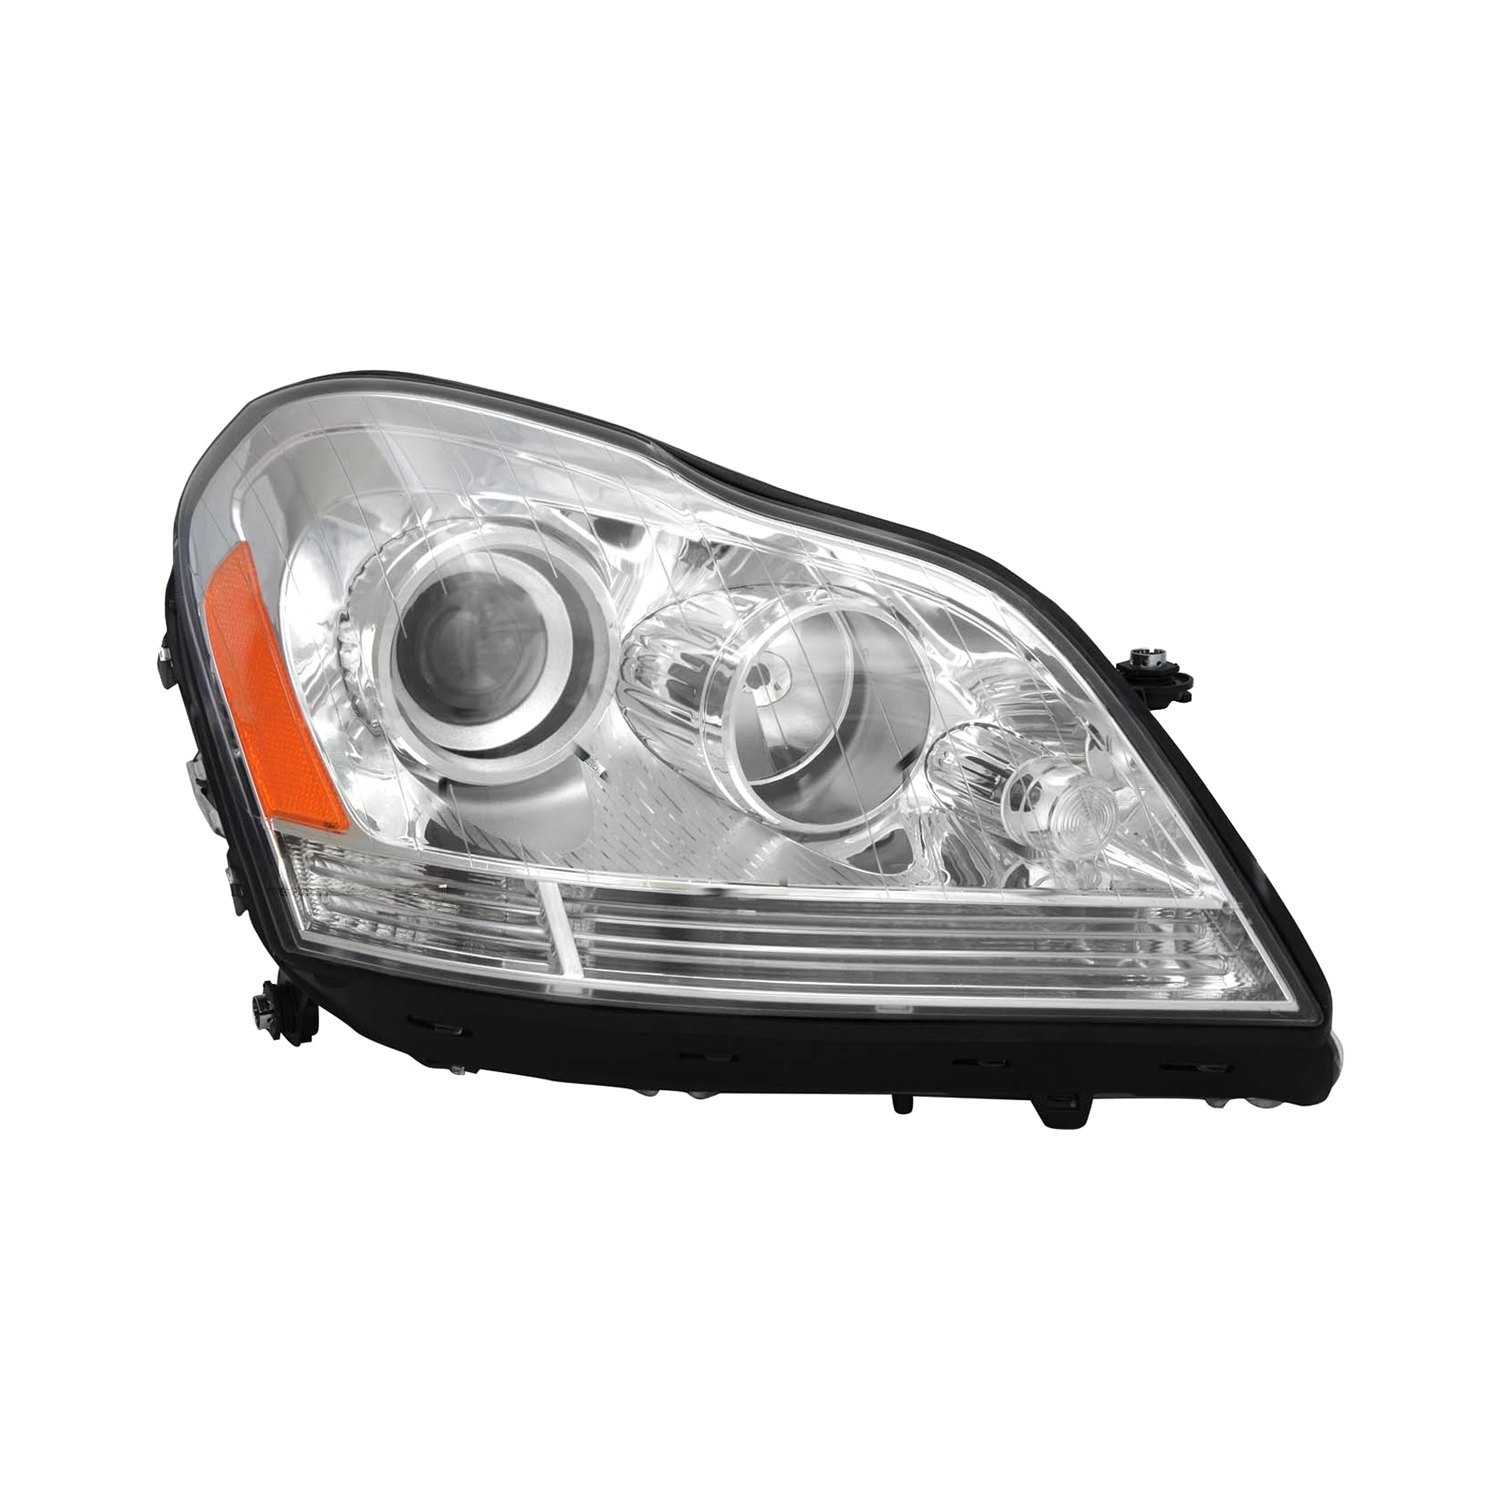 TYC 20-6929-00-1 For SATURN Aura Right Replacement Head Lamp